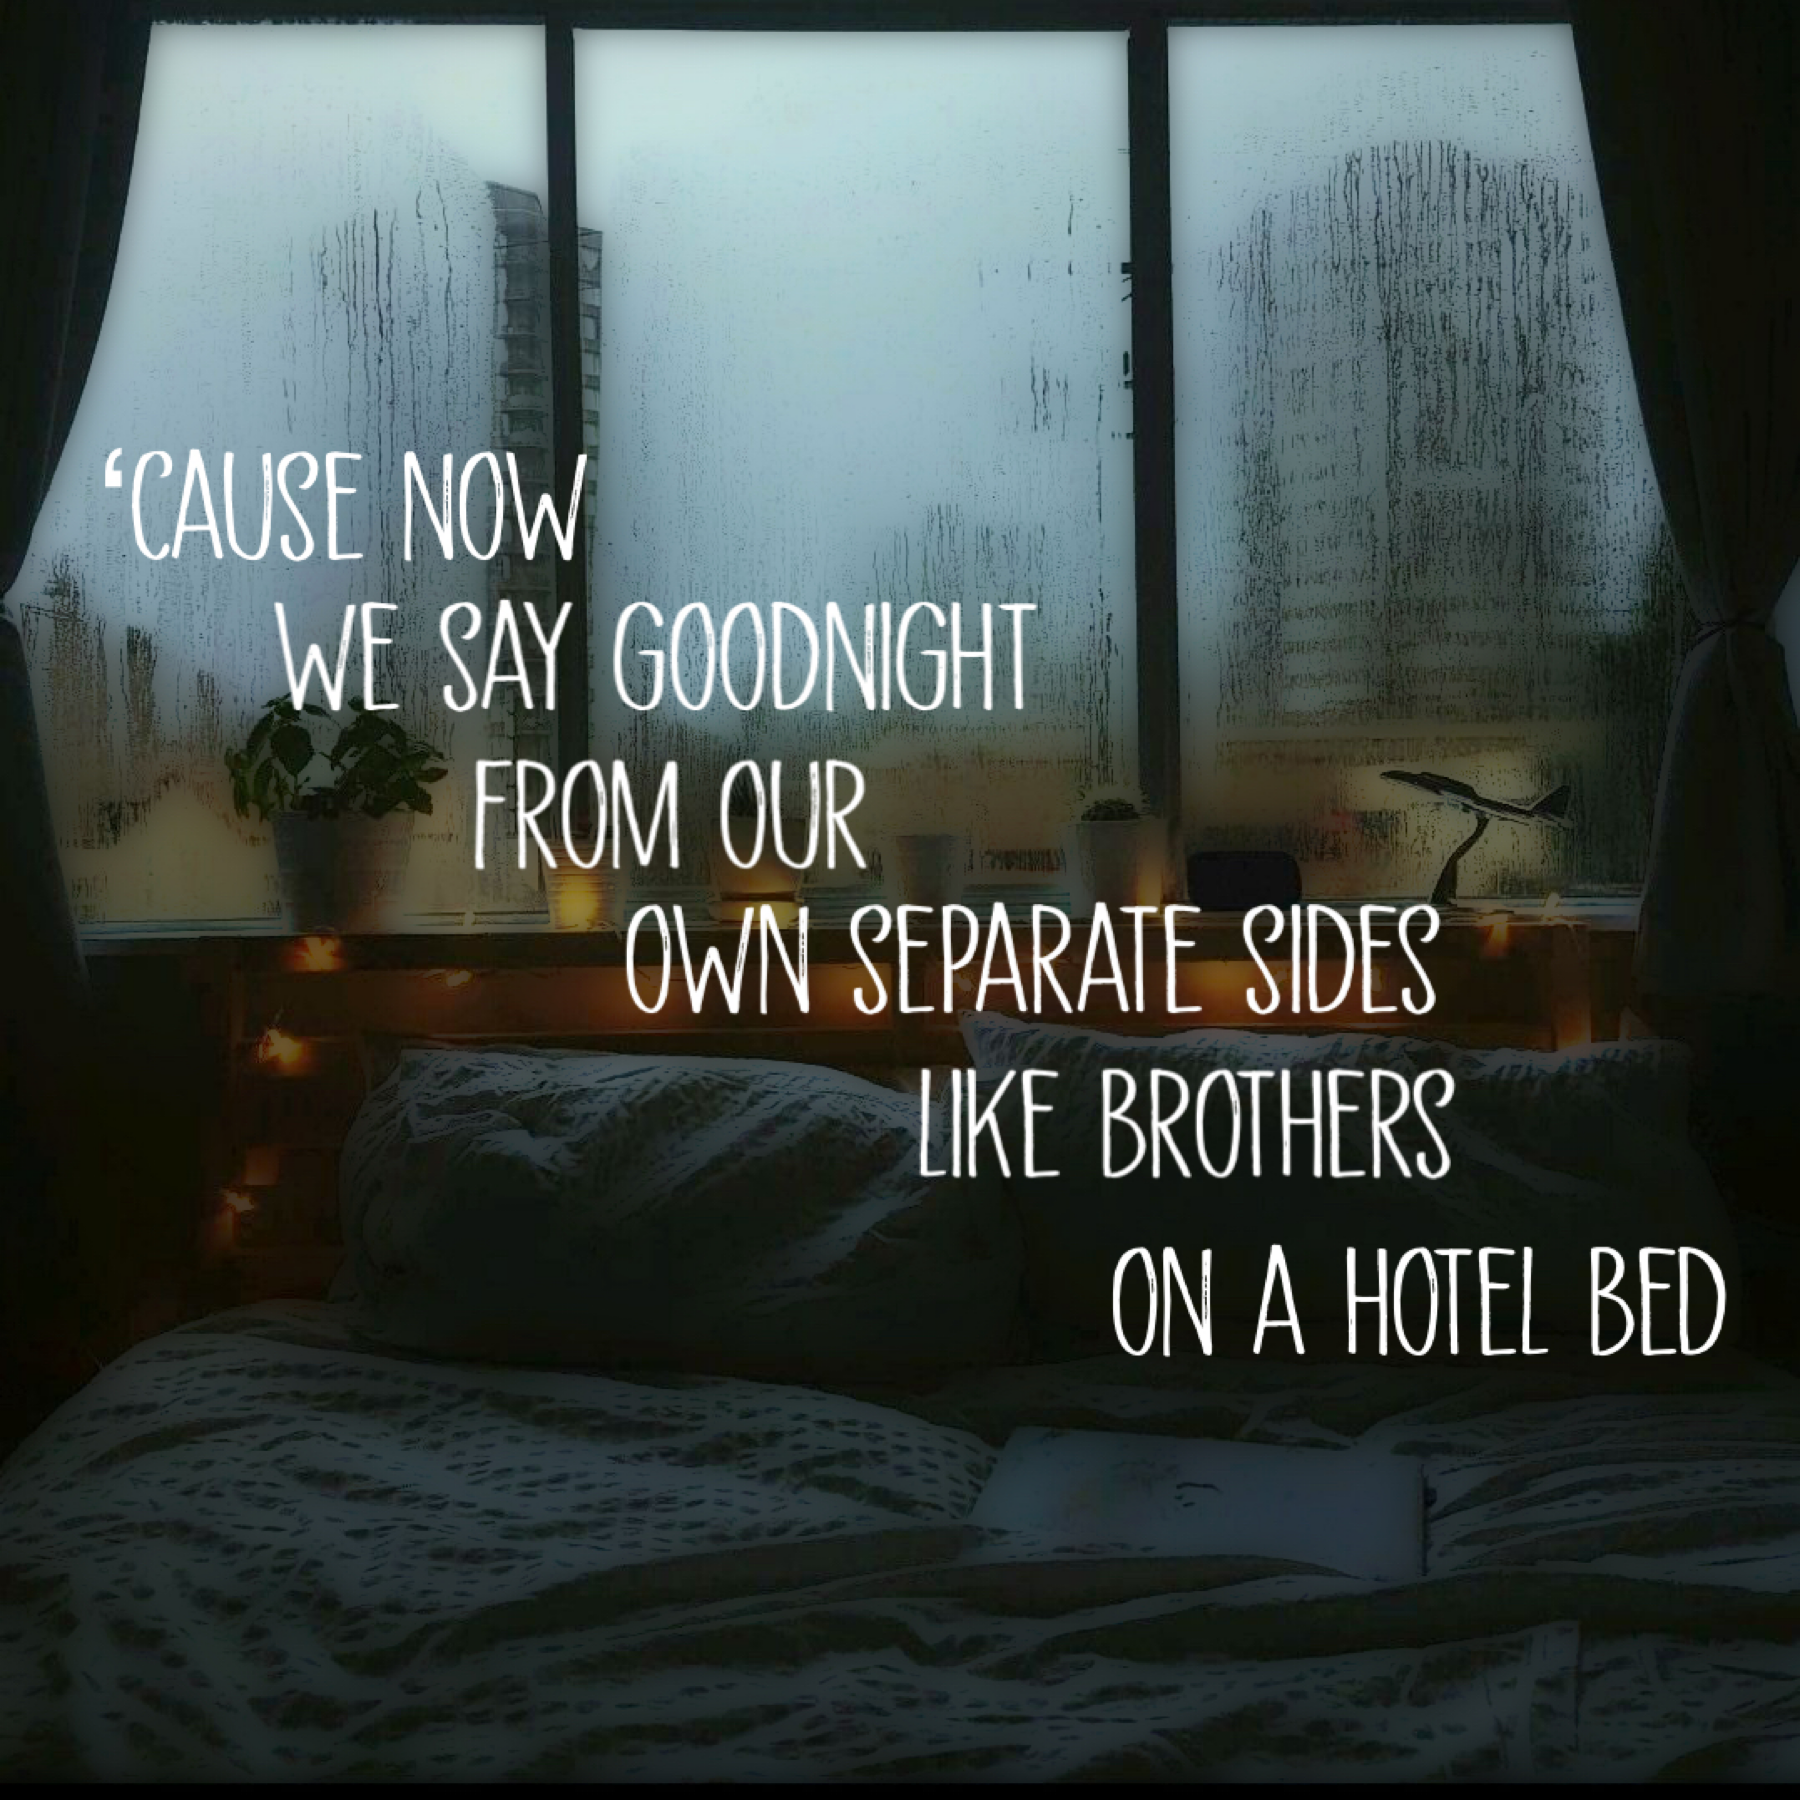 Brothers on a Hotel Bed// Death Cab For Cutie

There’s a reason I wanted to make one for this song m(._.)m